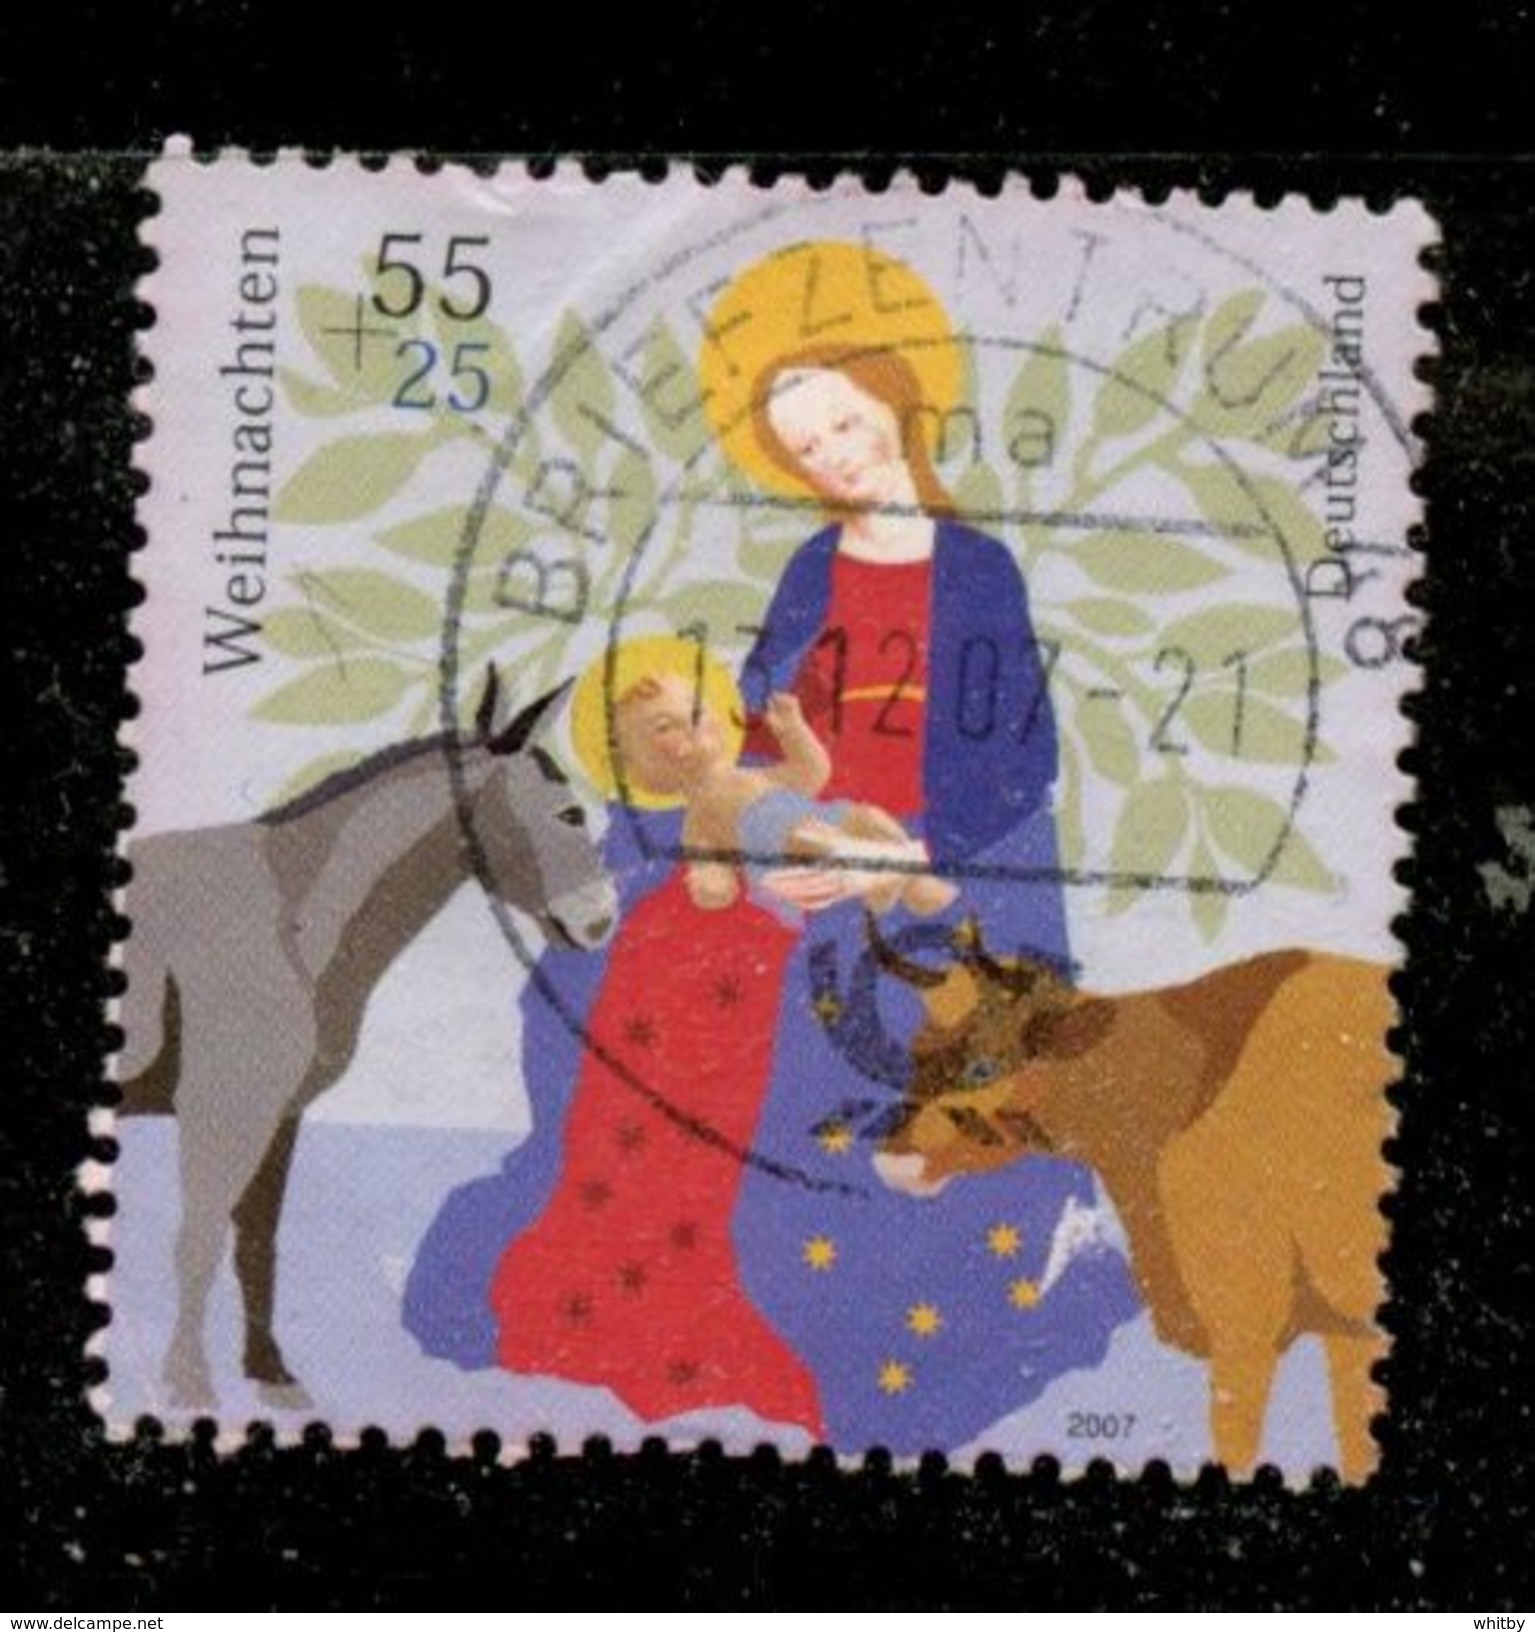 Germany 2007 55+25c Christmas Issue #B991 - Used Stamps